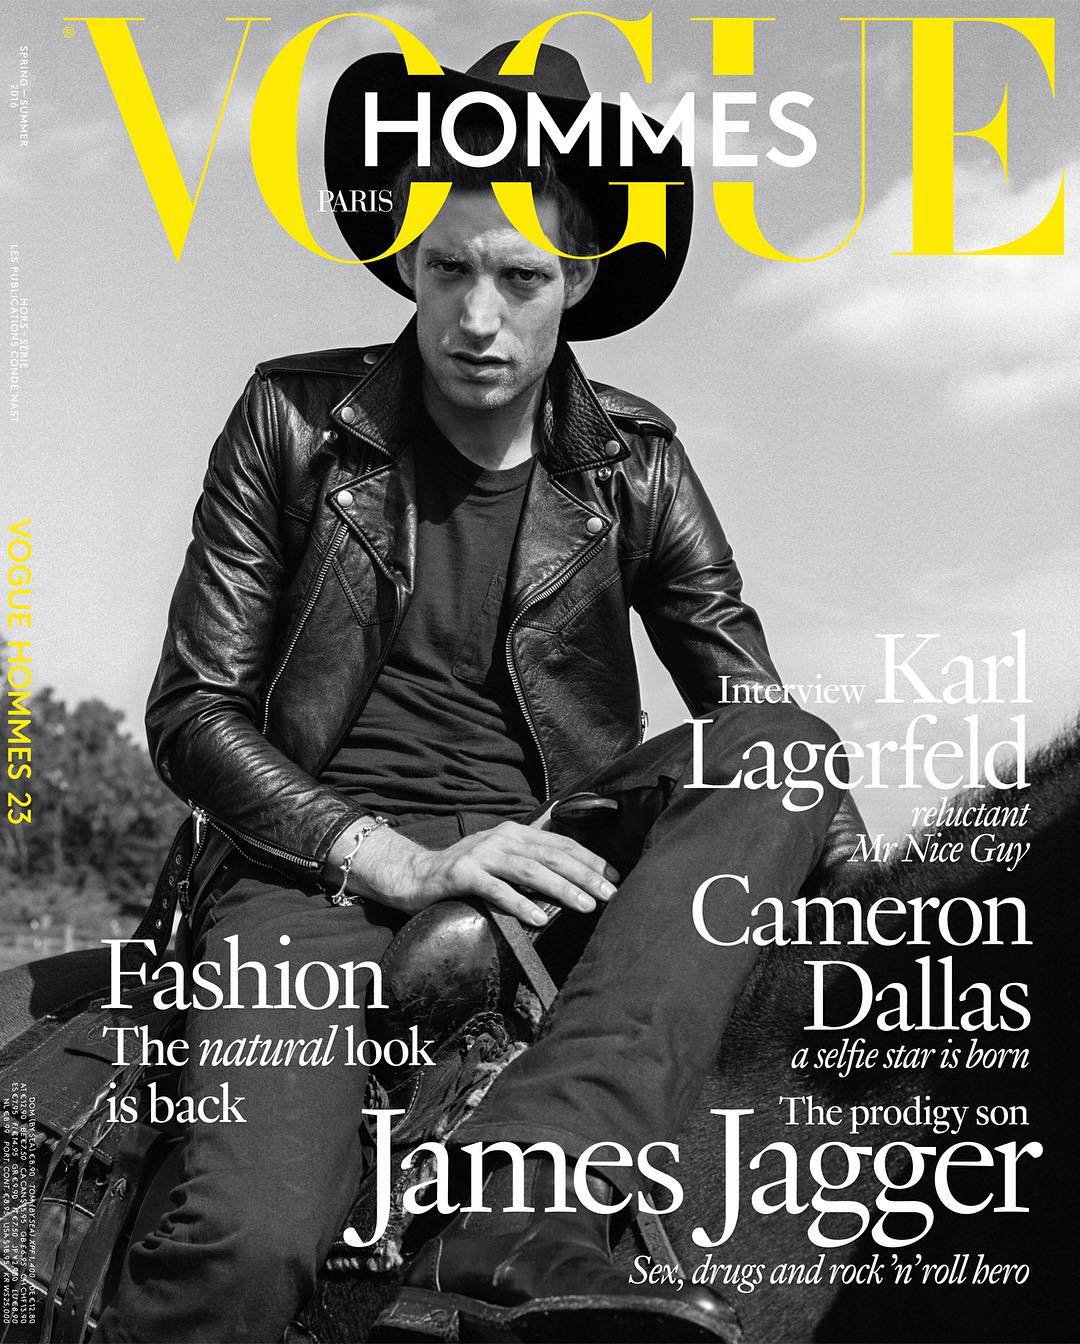 James Jagger Rocks Western Styles for Vogue Hommes Cover Shoot